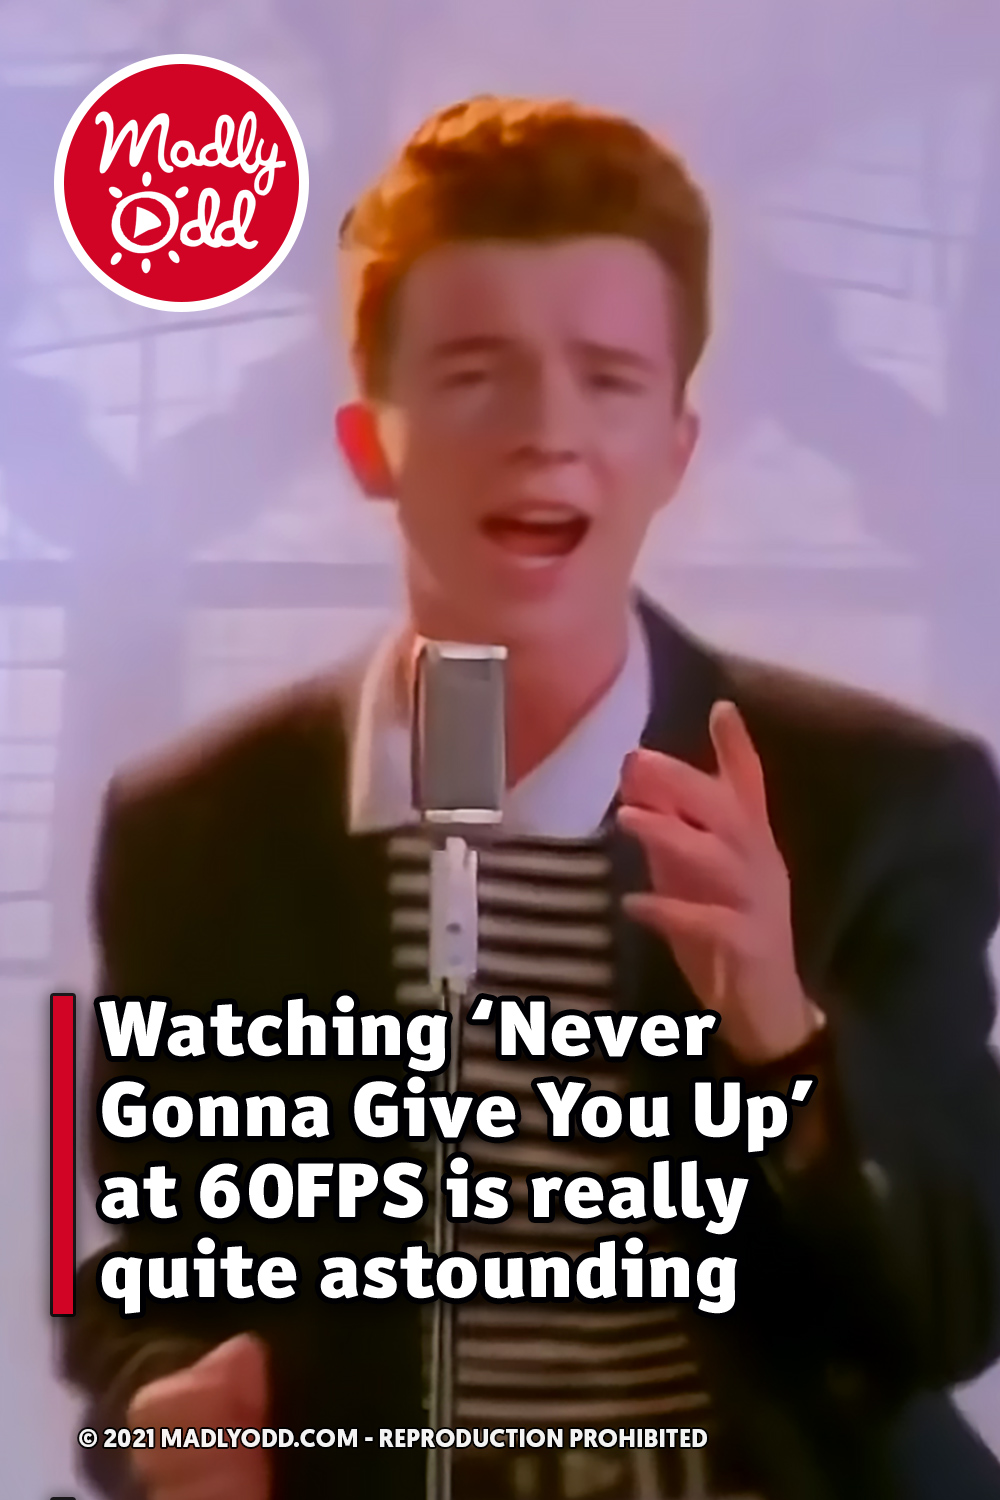 Watching ‘Never Gonna Give You Up’ at 60FPS is really quite astounding